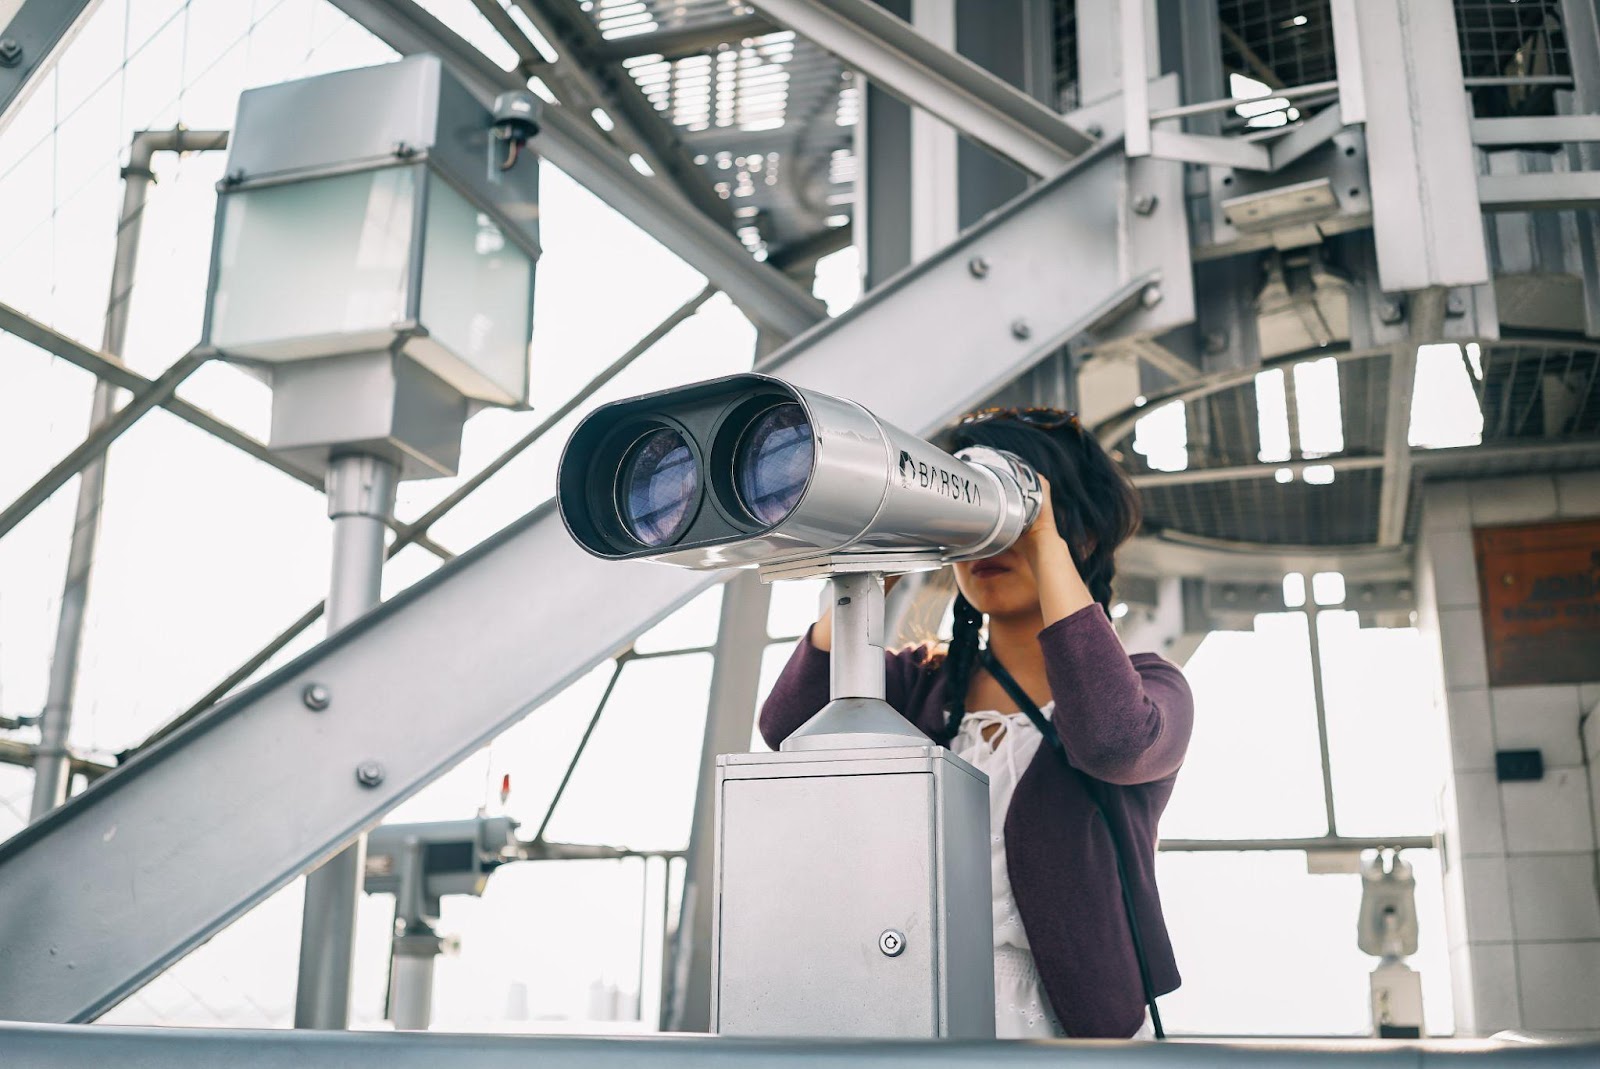 A person gazes into a high tech telescope standing in front of what appears to be a technical or engineering related object made from metal.